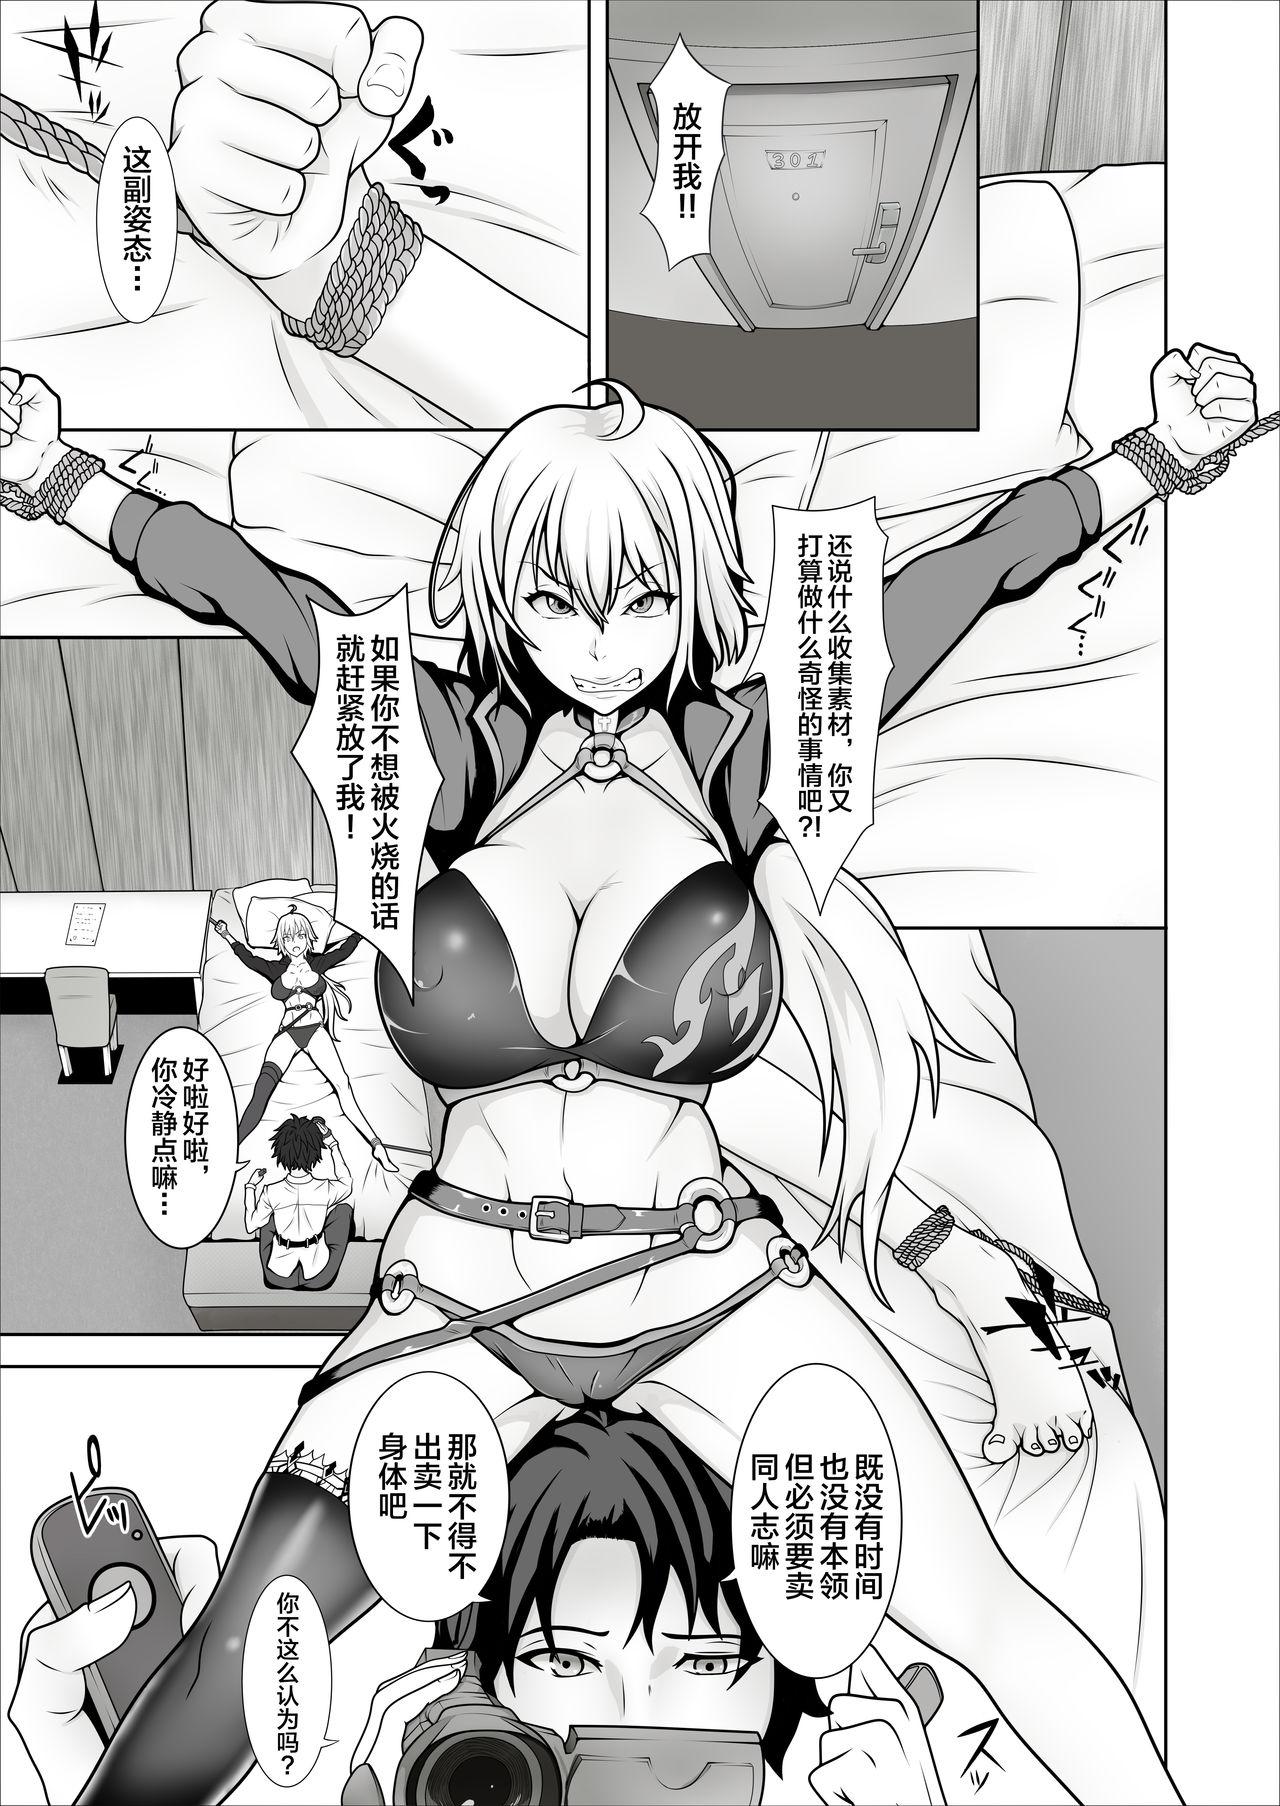 Phat Ass 俺のジャンヌは性処理係 - Fate grand order Love - Page 11